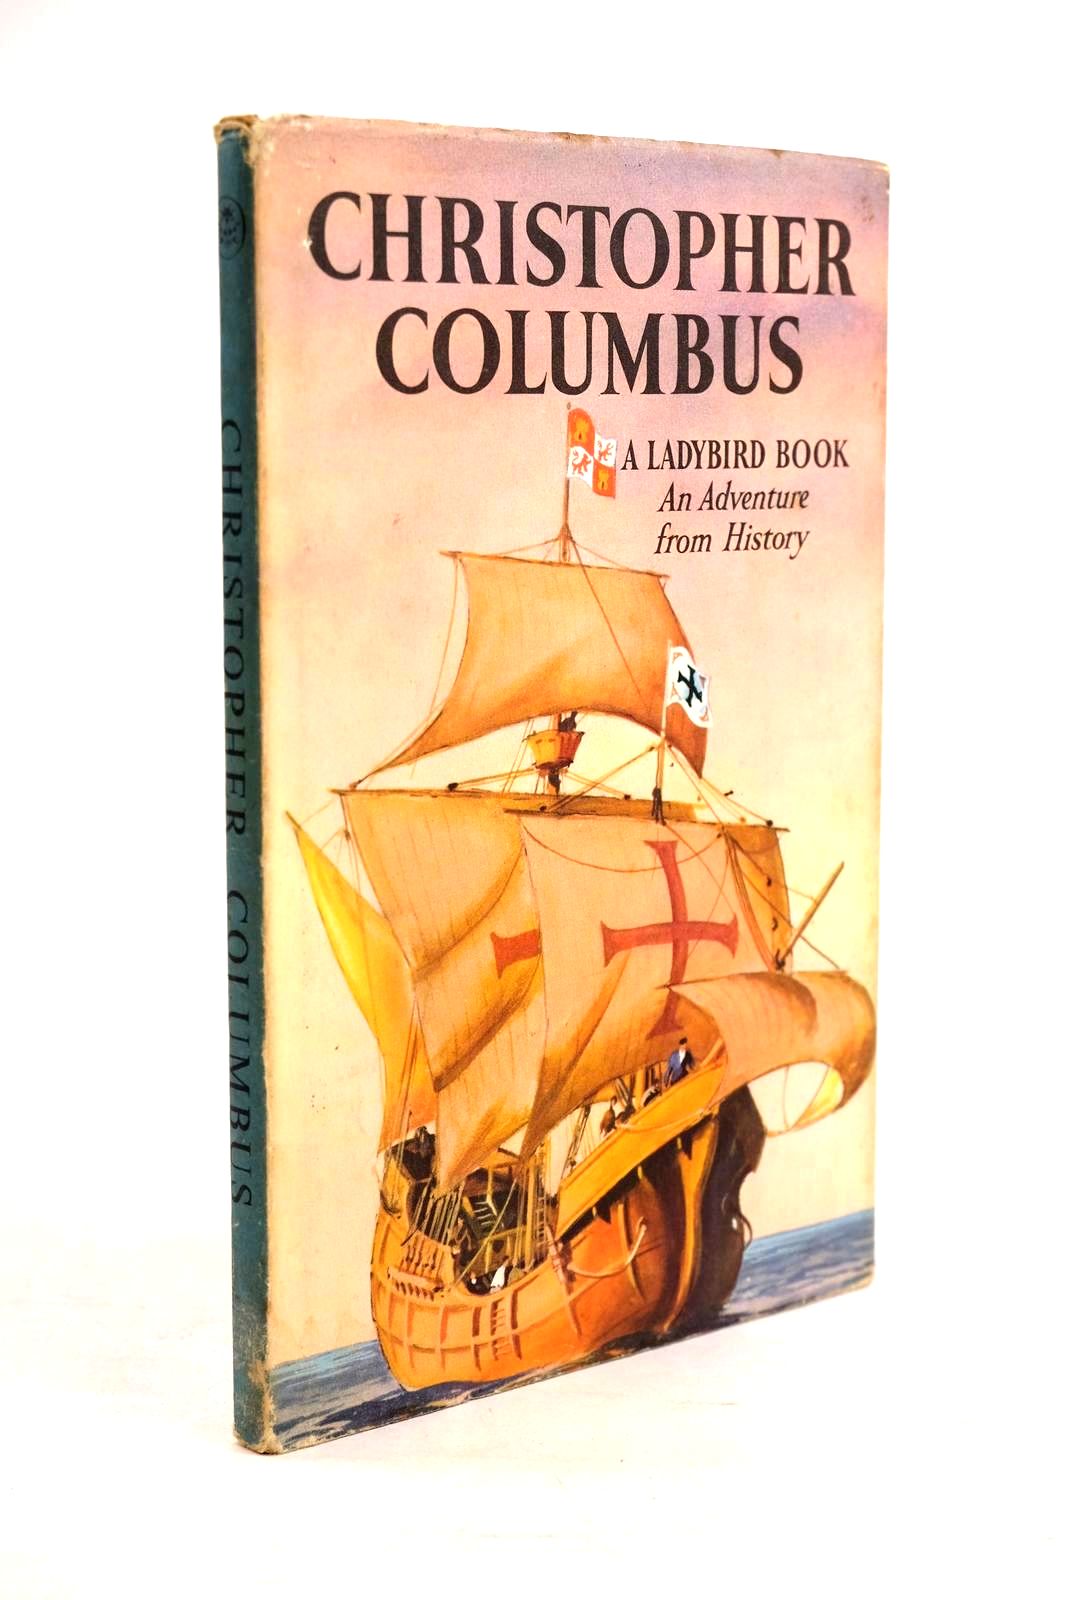 Photo of CHRISTOPHER COLUMBUS written by Peach, L. Du Garde illustrated by Kenney, John published by Wills & Hepworth Ltd. (STOCK CODE: 1320626)  for sale by Stella & Rose's Books